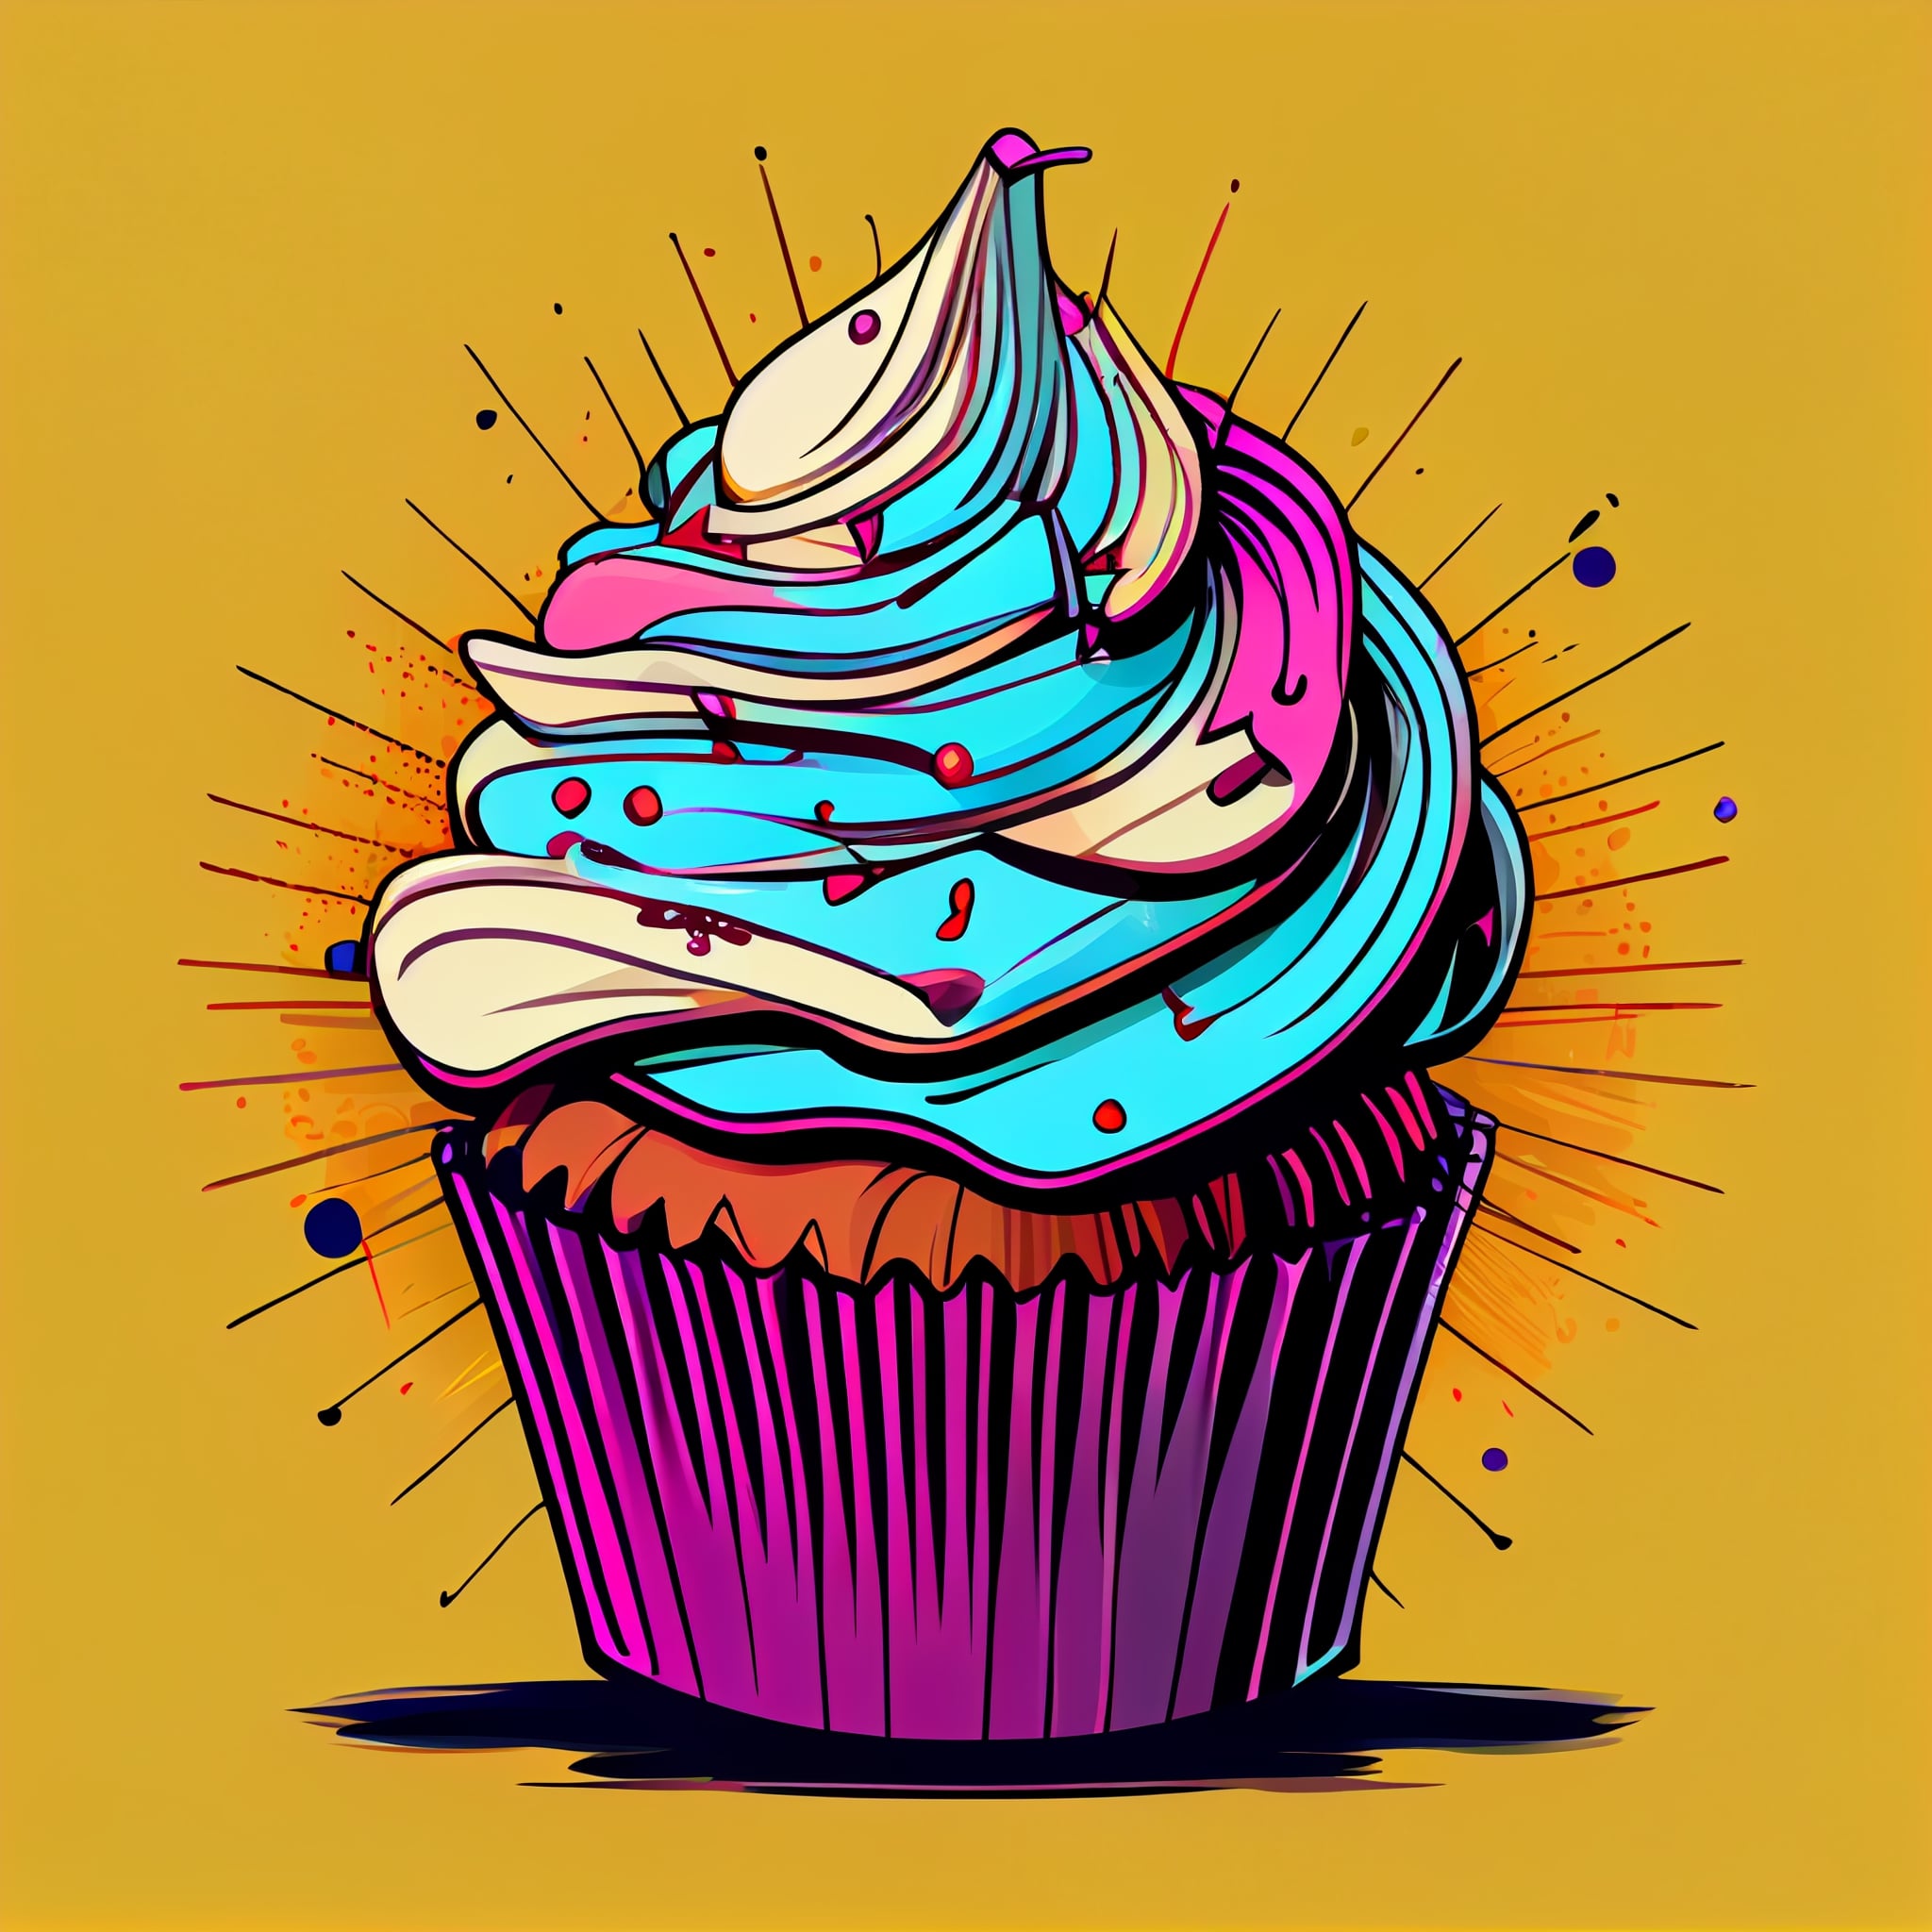 Cupcake with blue frosting and sprinkles on a yellow background.